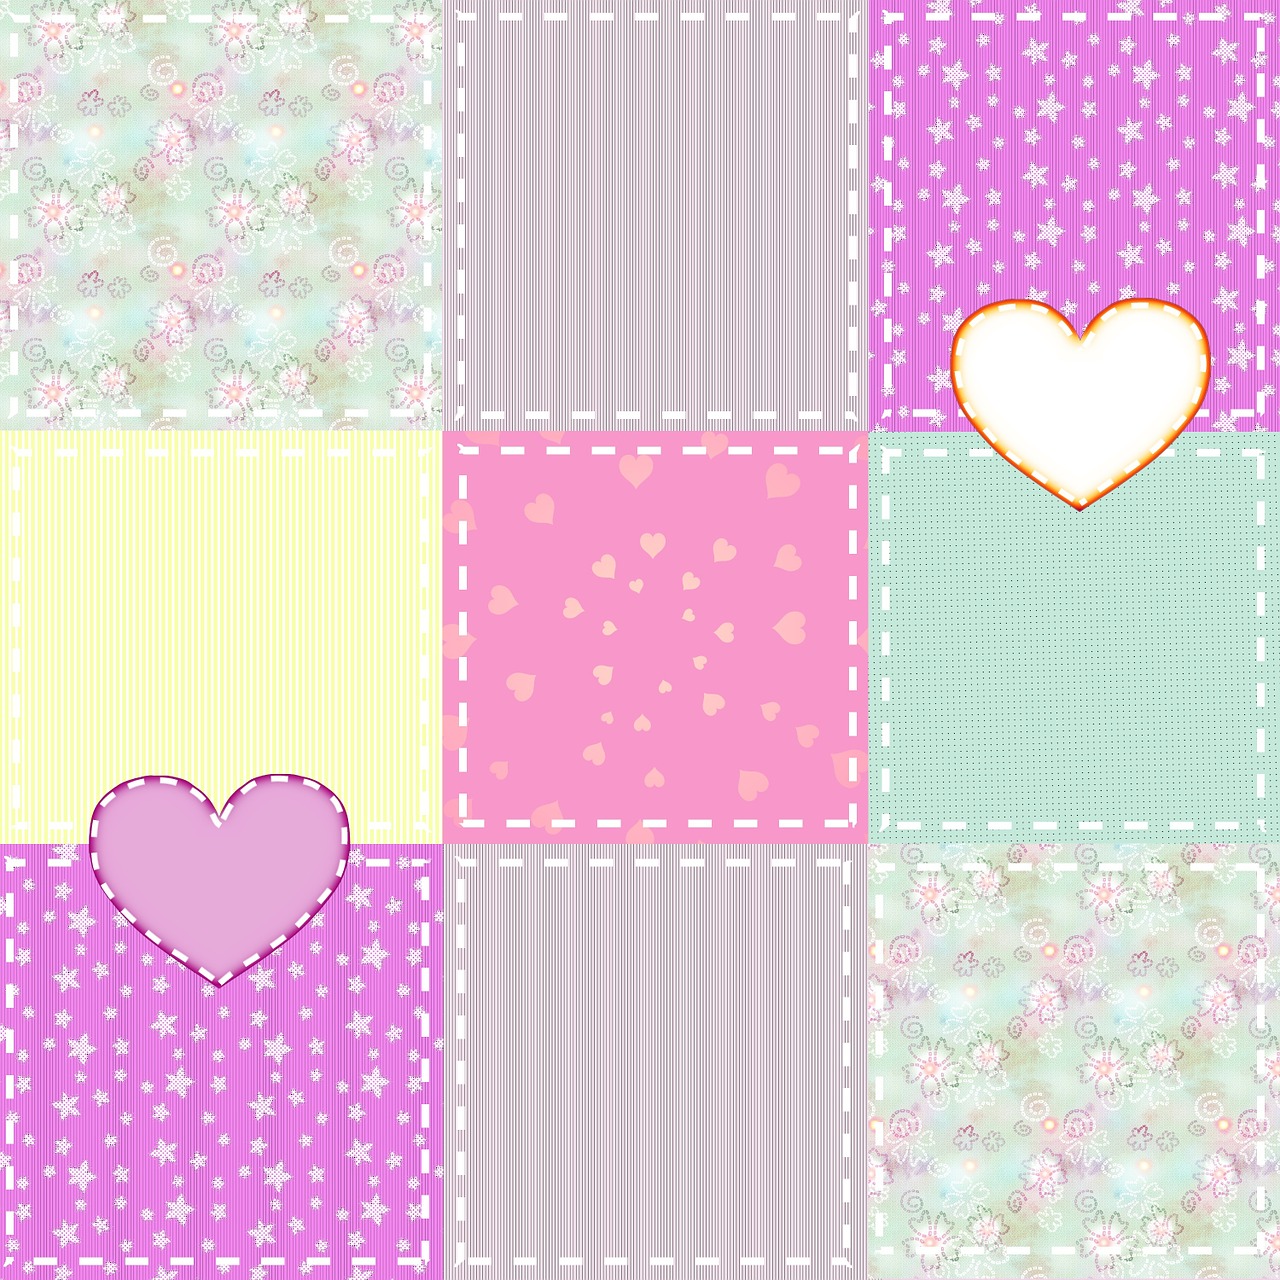 patchwork material colored free photo